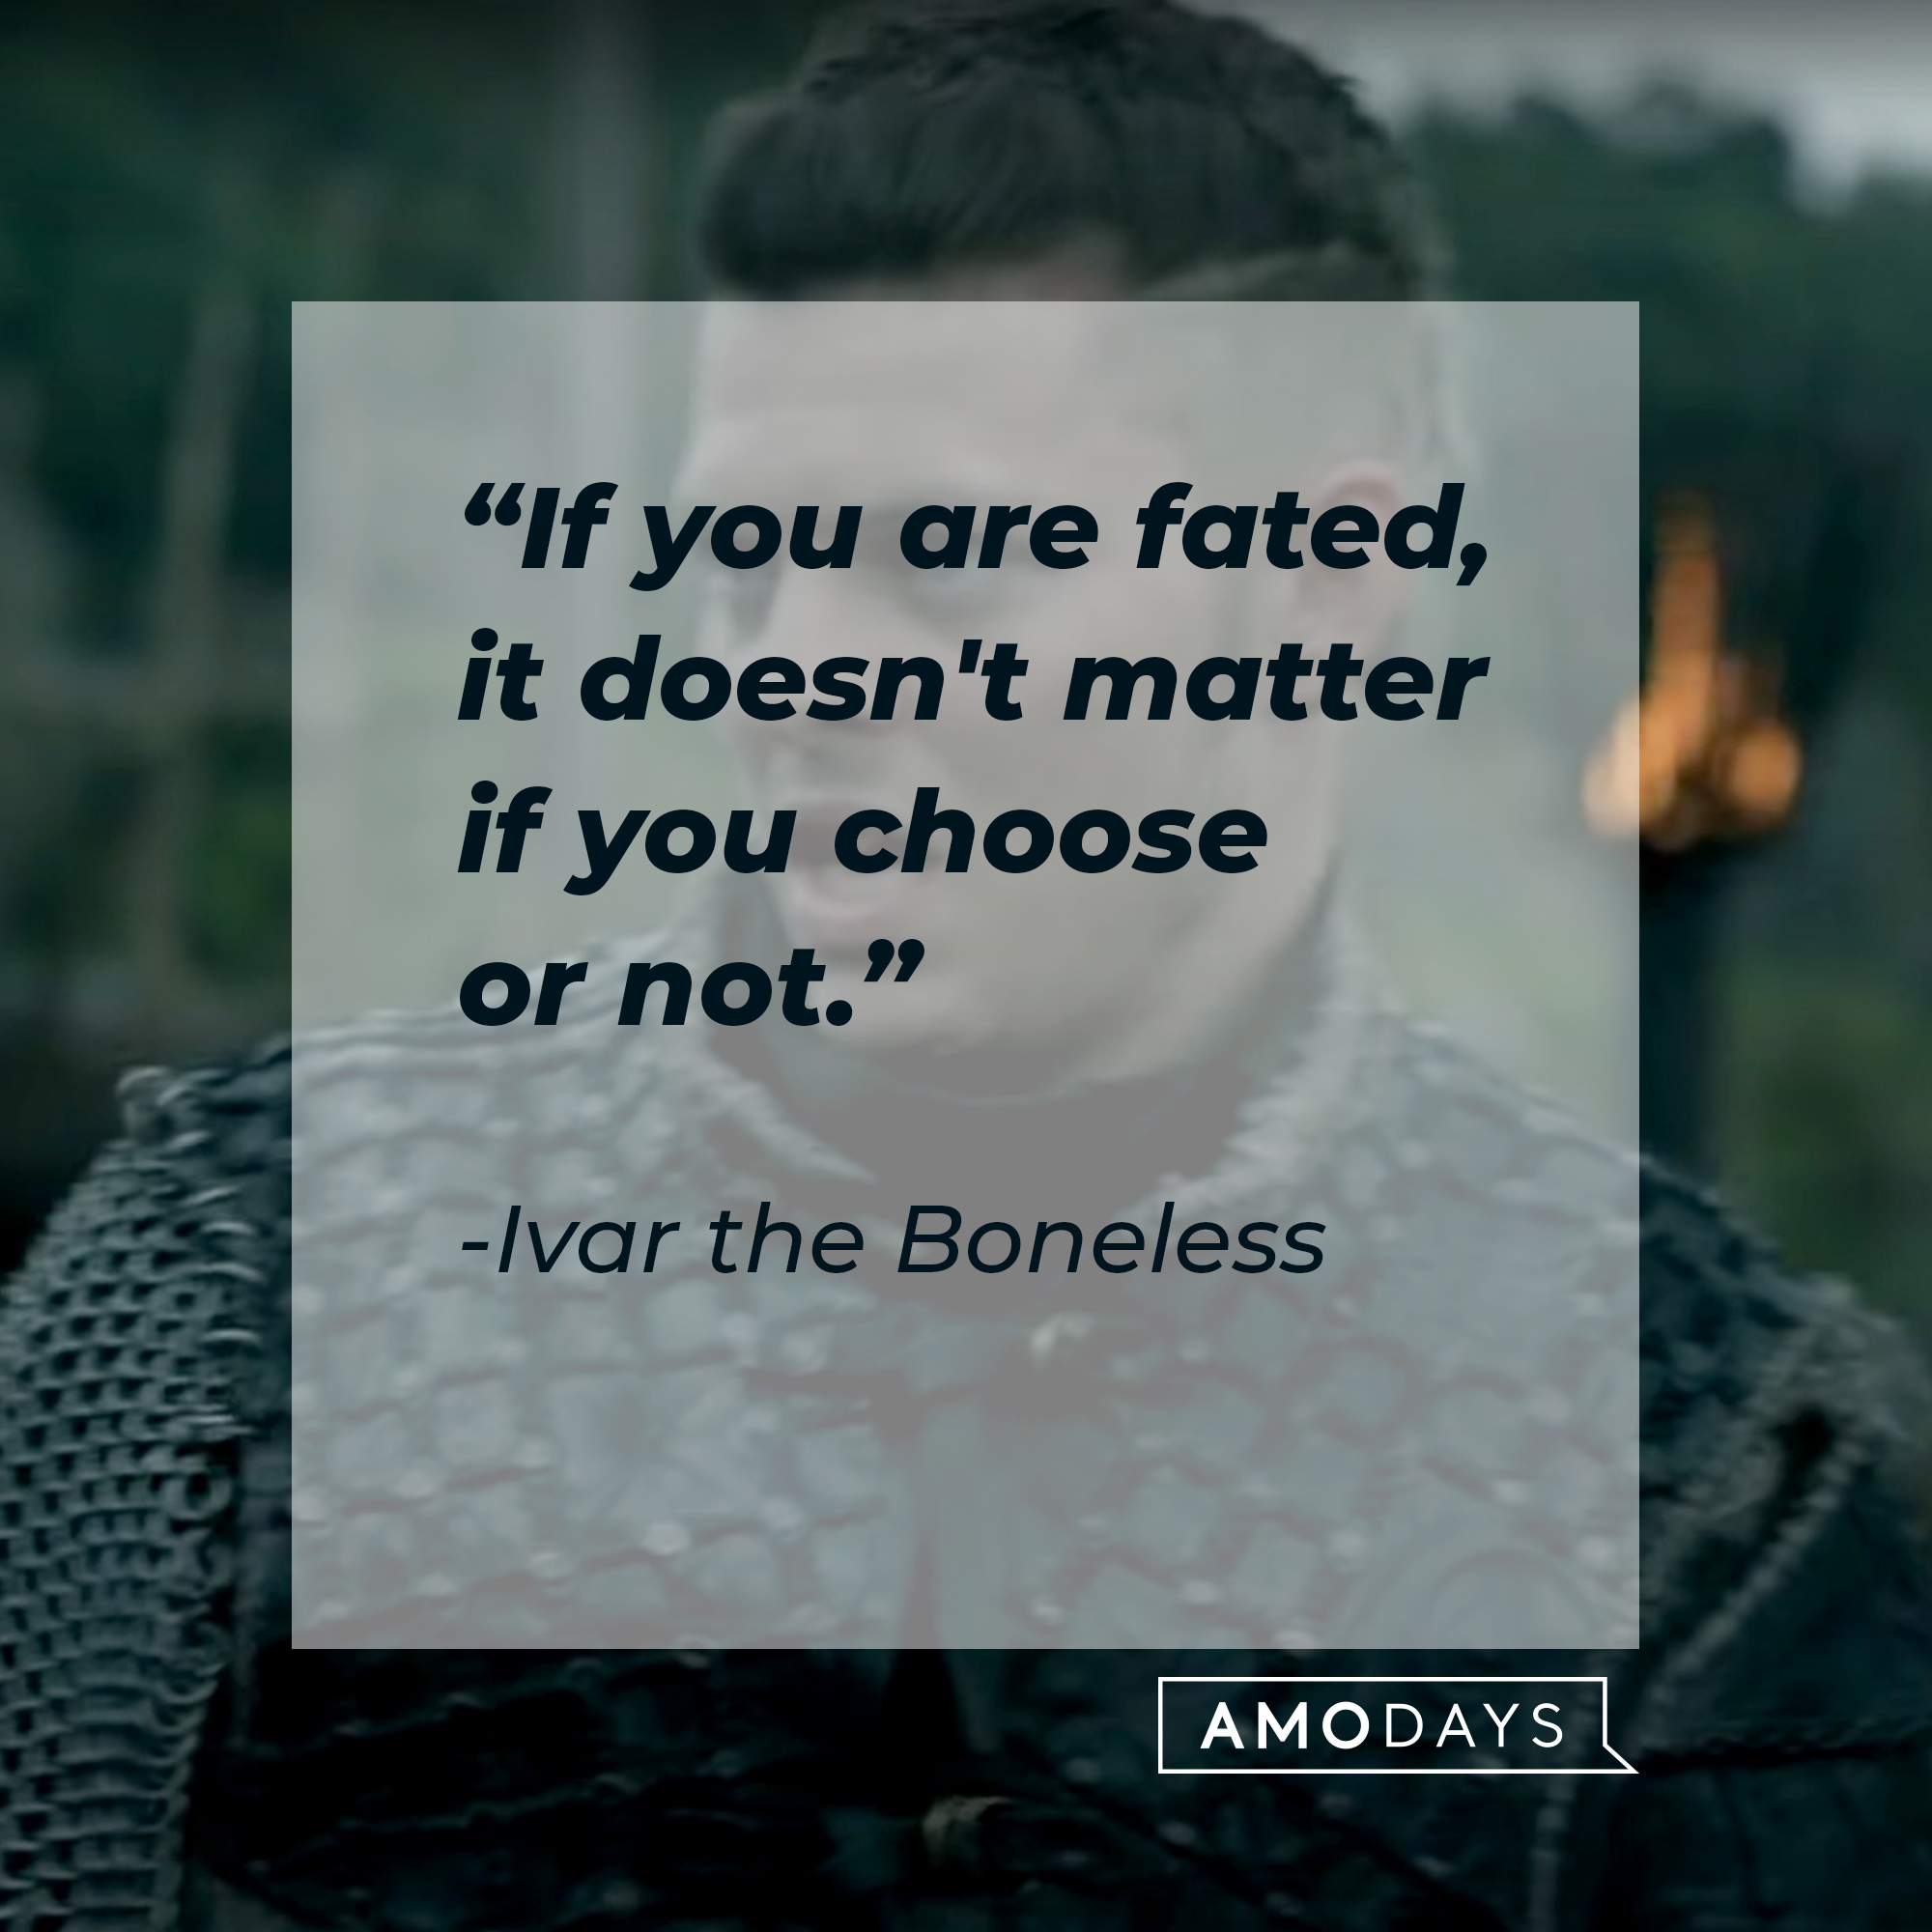 A picture of Ivar the Boneless with his quote: "If you are fated, it doesn’t matter if you choose or not."┃Source: youtube.com/PrimeVideoUK